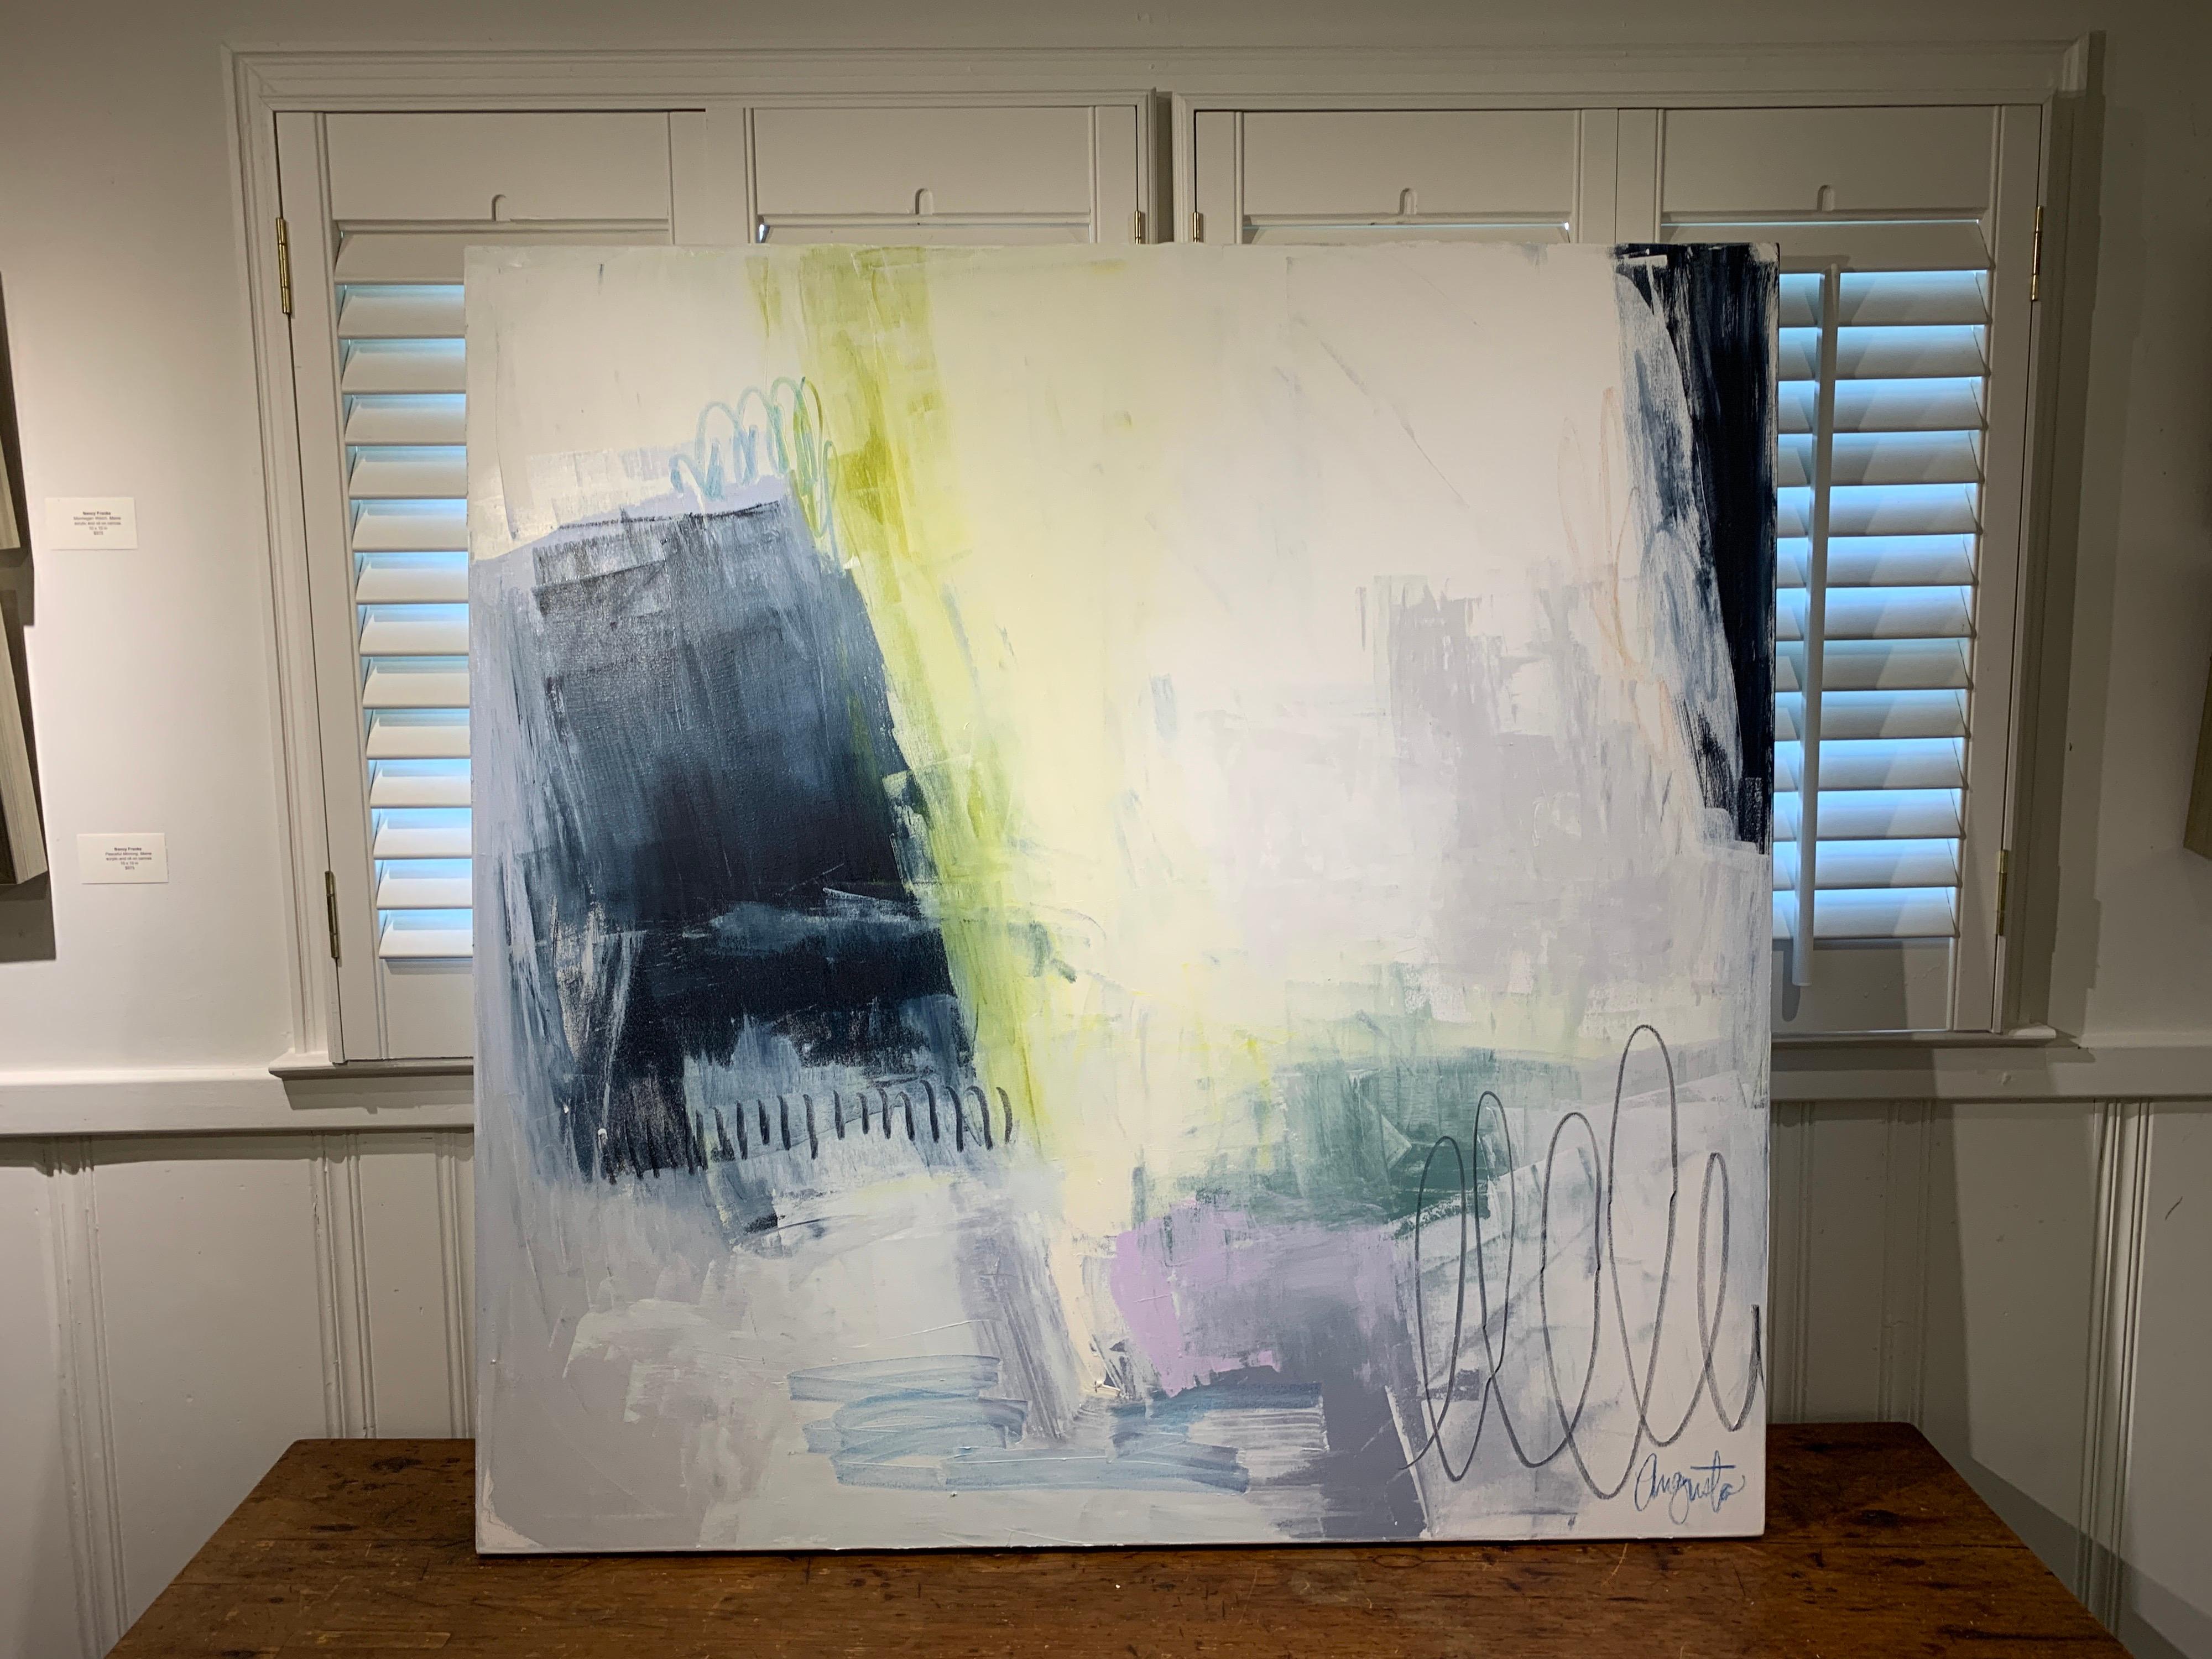 'Whip It' is a large abstract oil on canvas painting created by American artist Augusta Wilson in 2020. Featuring a large square format, this painting is adorned with a cream and taupe background that is the perfect setting to highlight the